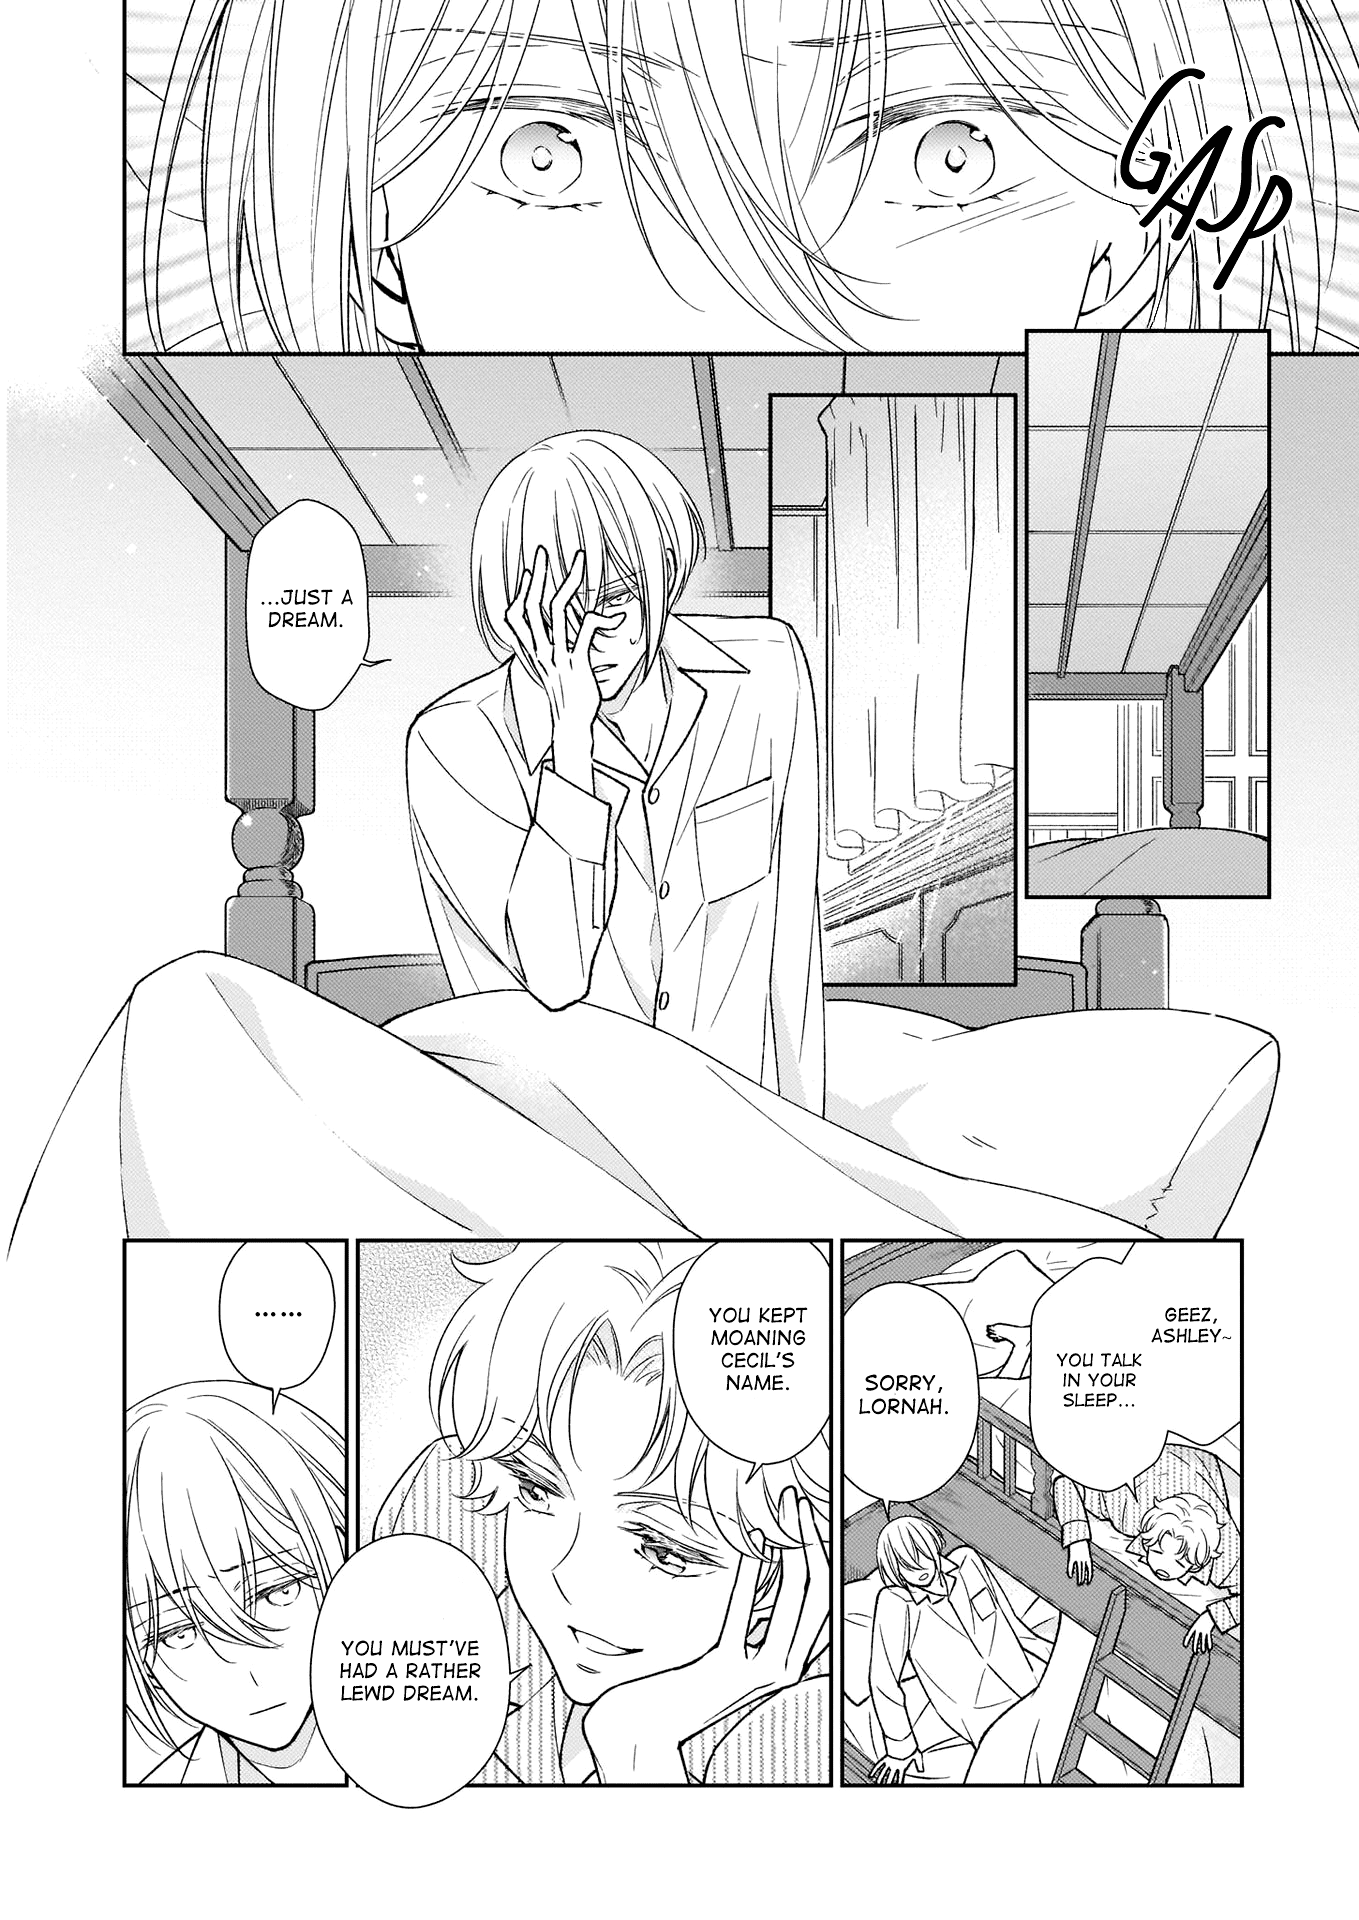 The Result Of Being Reincarnated Is Having A Master-Servant Relationship With The Yandere Love Interest - Page 2